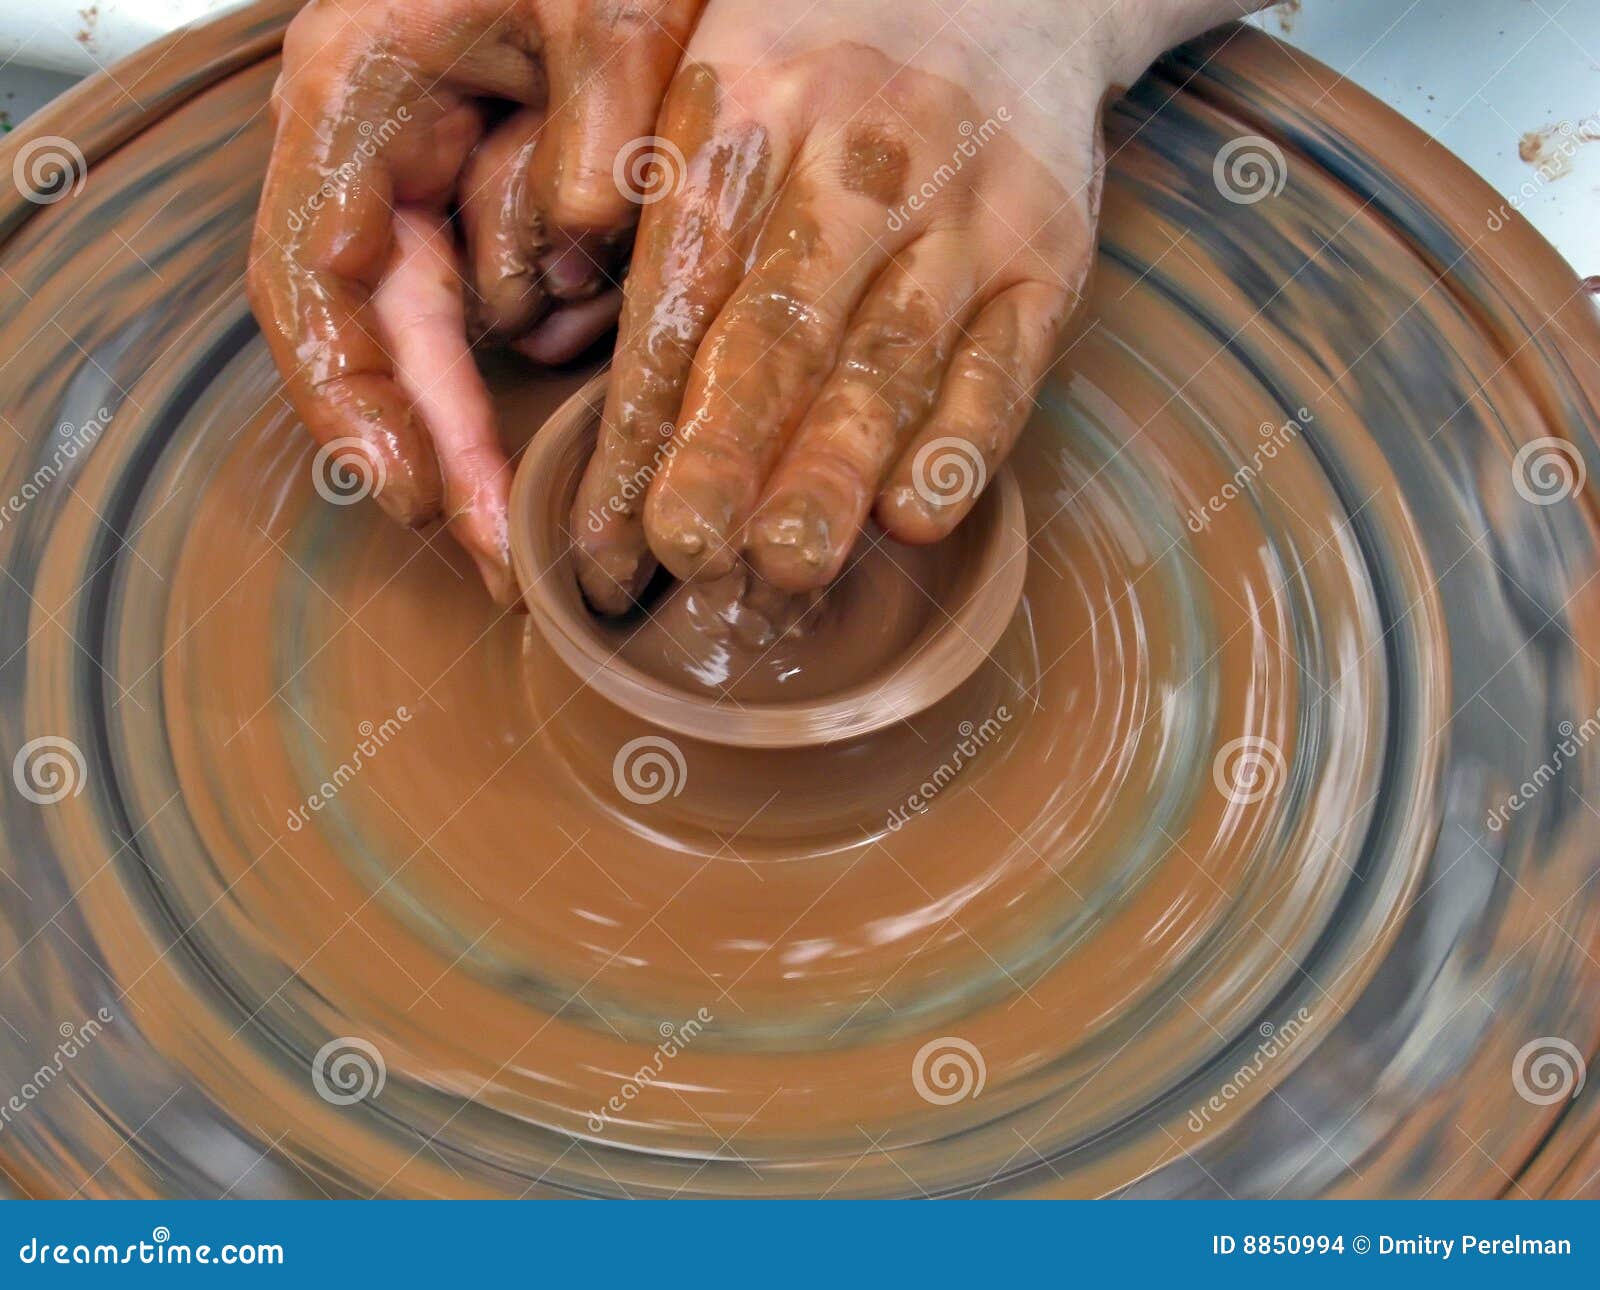 person using potters wheel